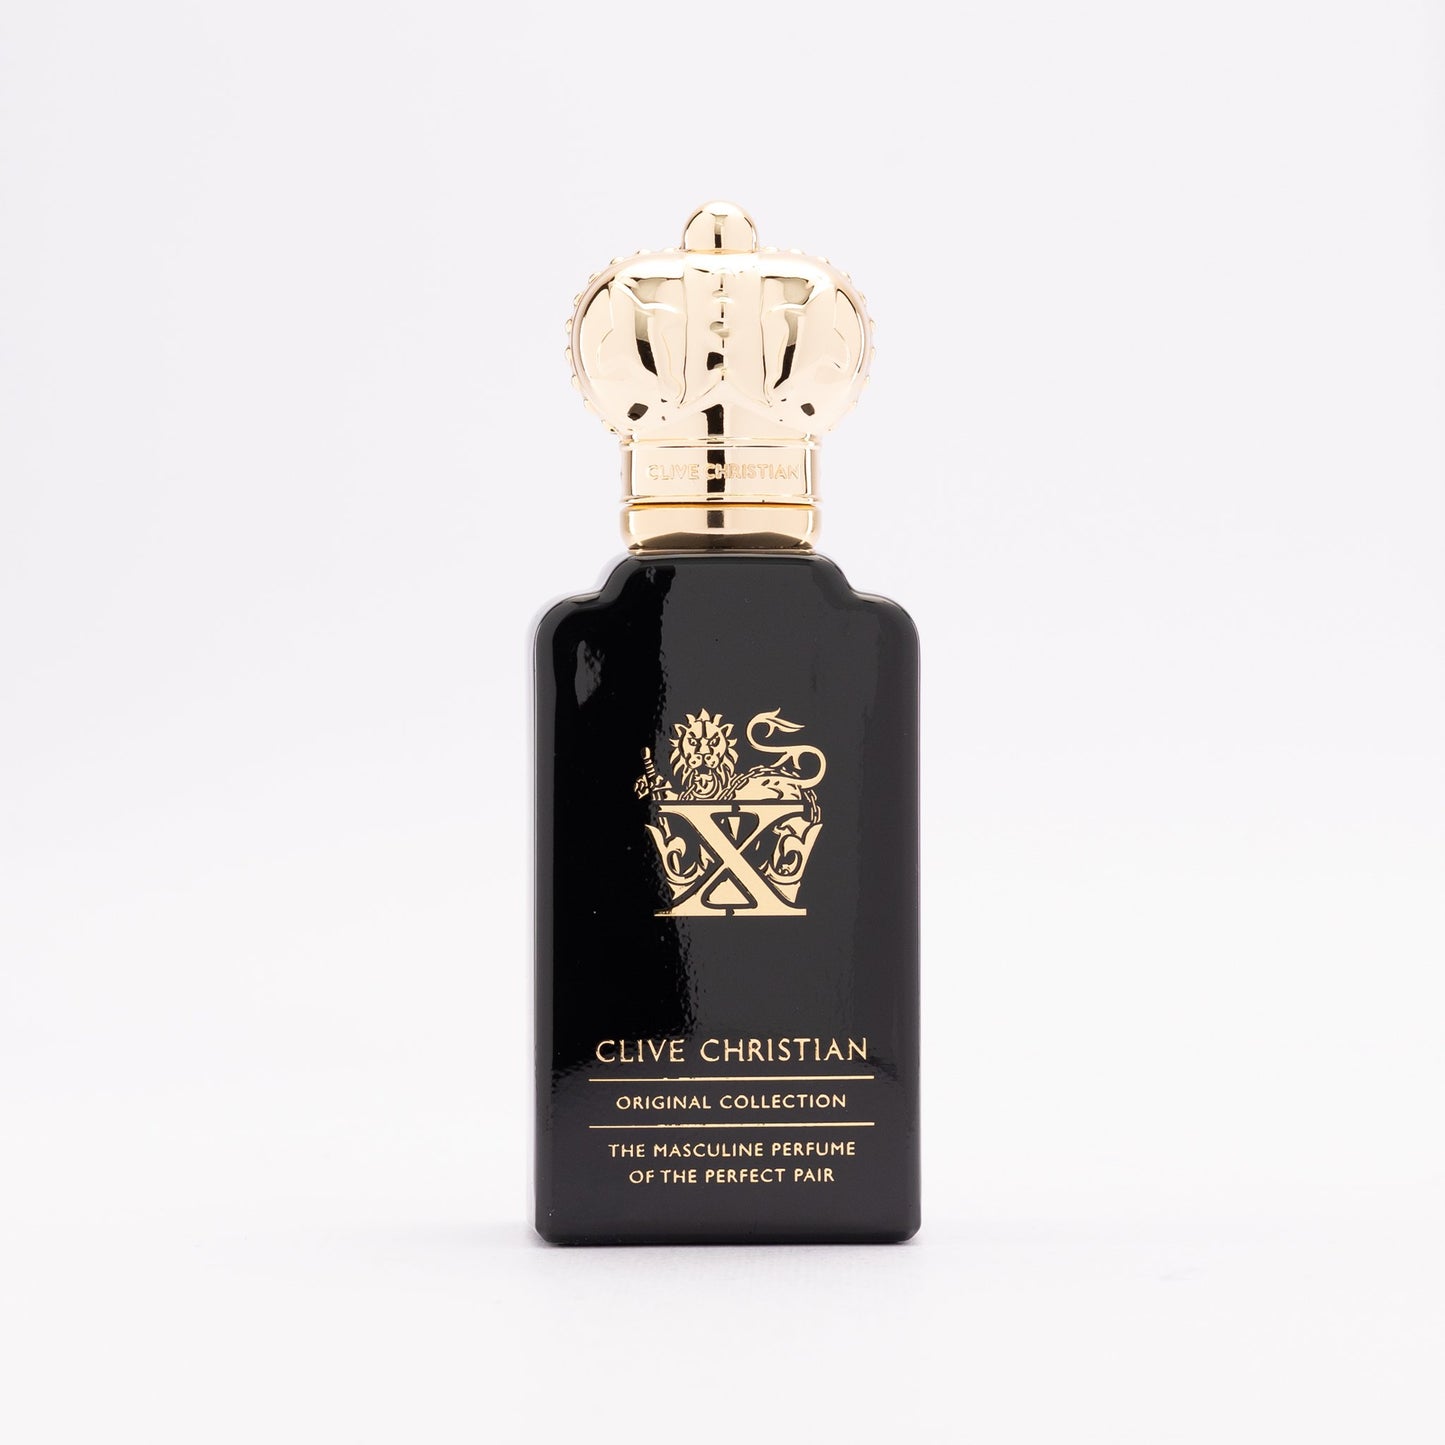 X - The Masculine Perfume of the Perfect Pair